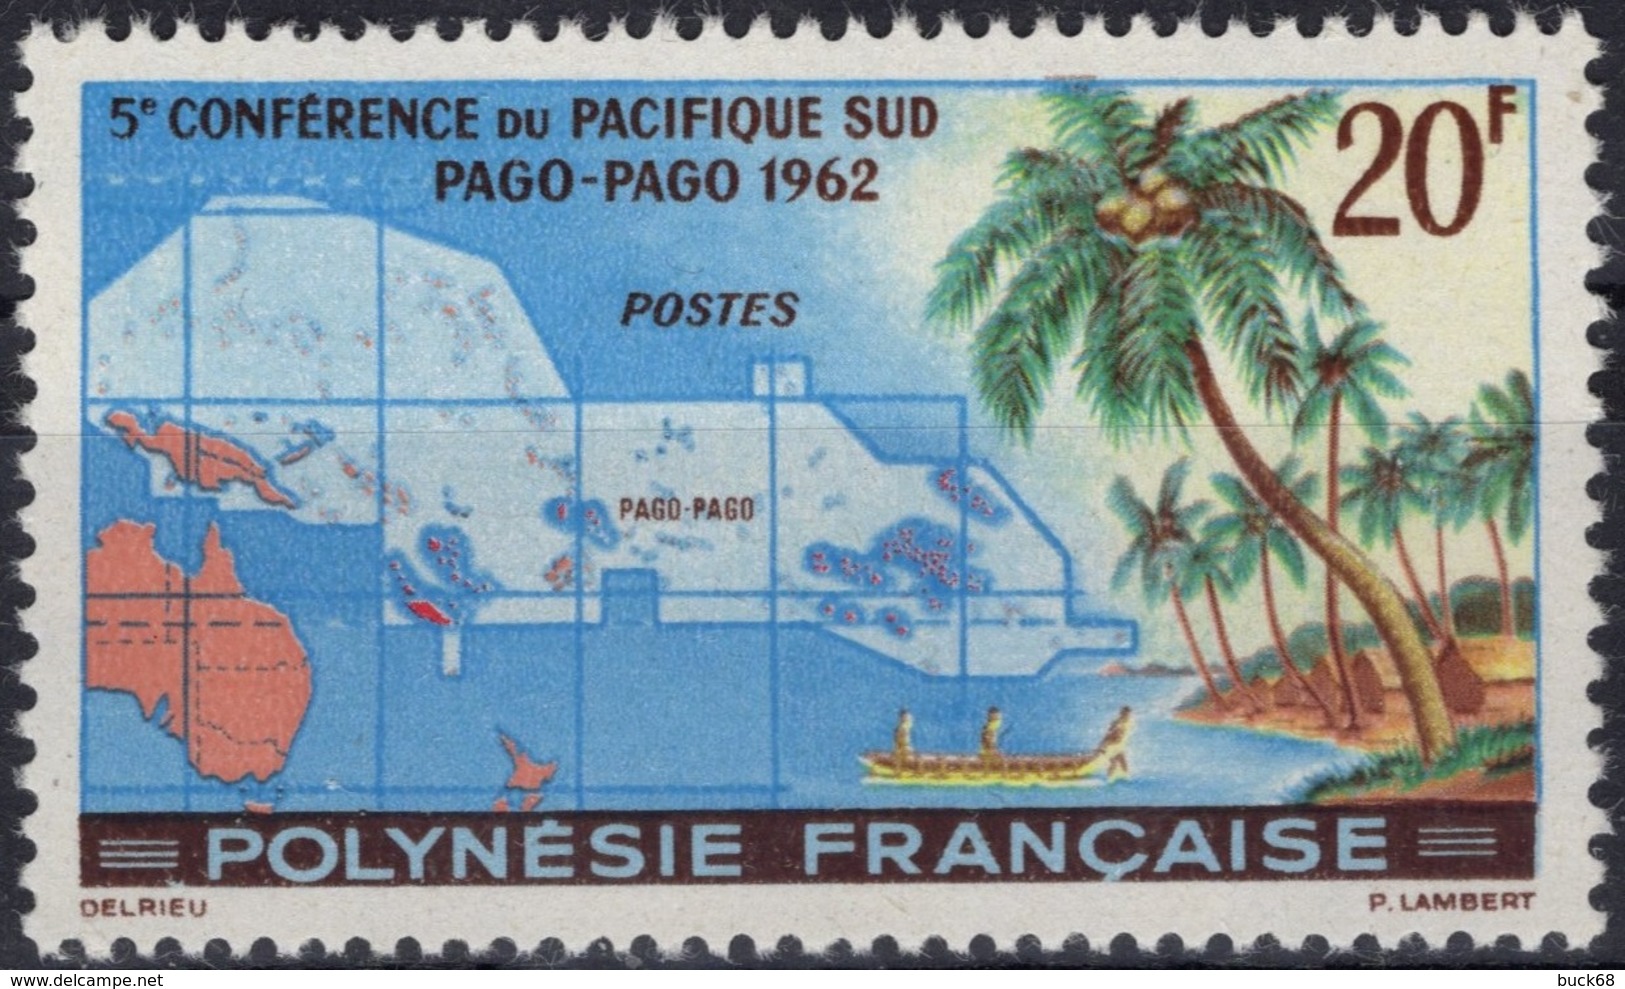 POLYNESIE FRANCAISE Poste 17 ** MNH Conférence Pacifique Sud PAgo-PAho 1952  (CV 22,70 €) - Used Stamps